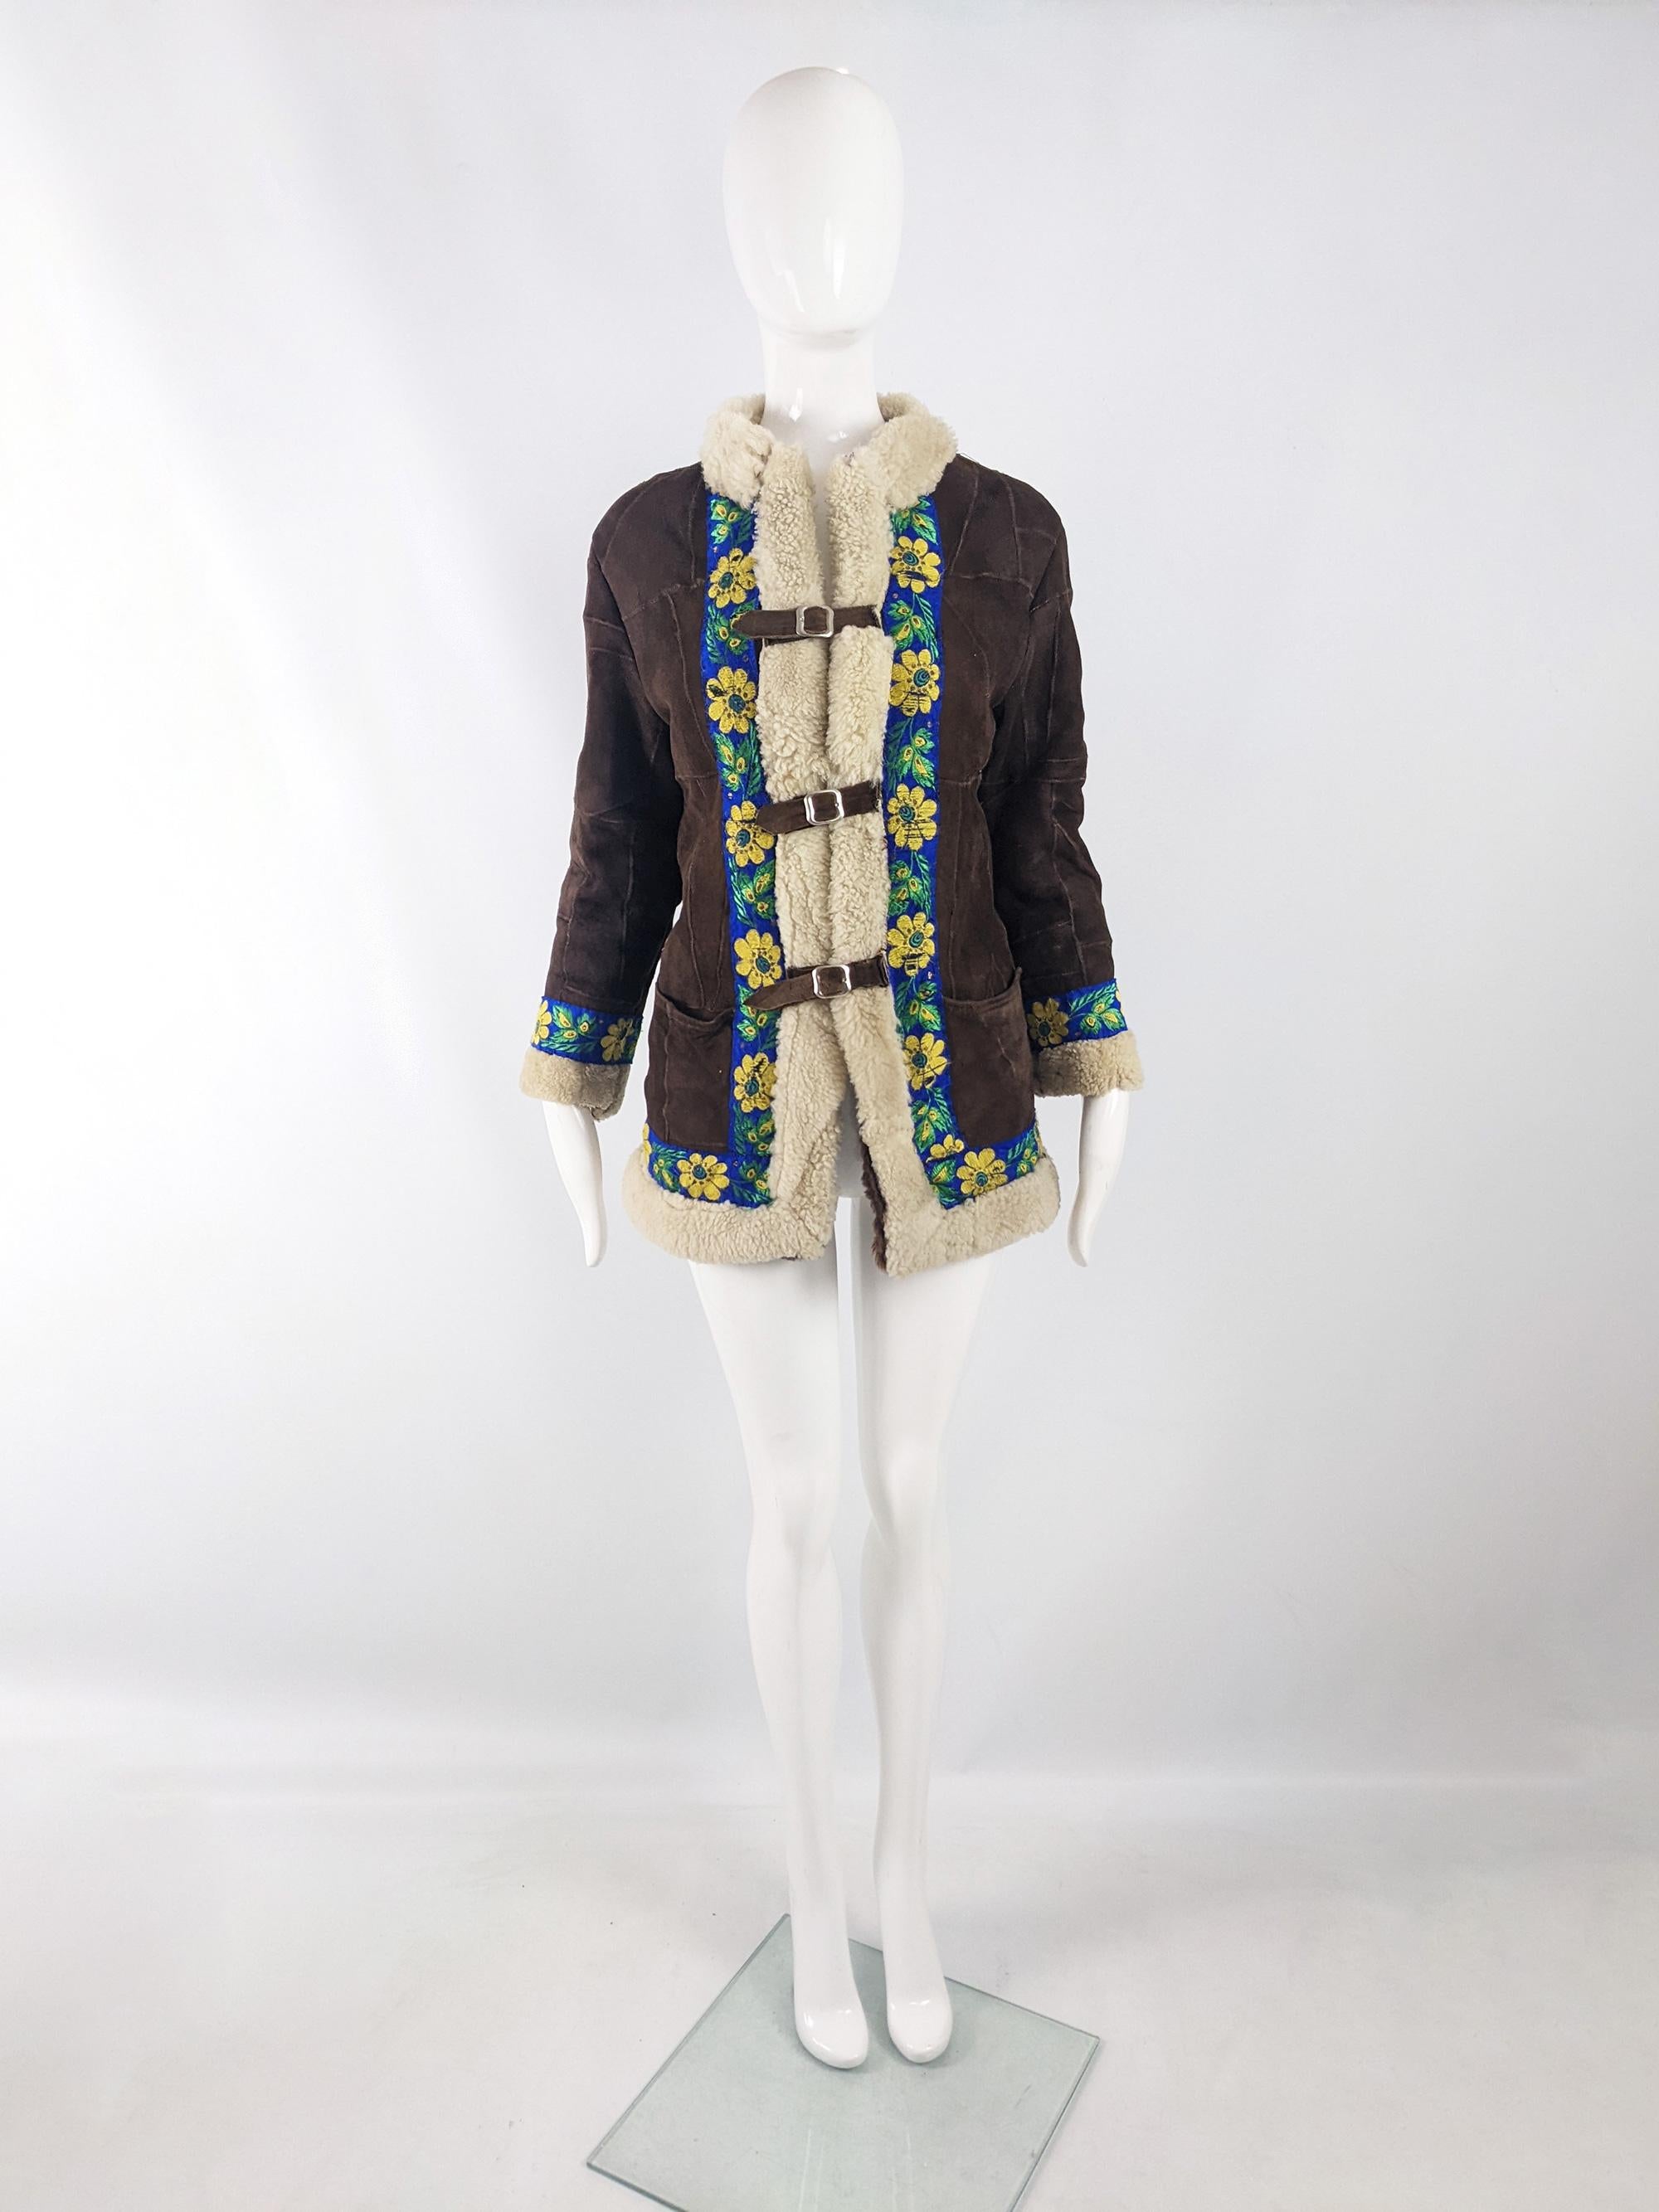 An incredible and rare vintage womens Afghan coat from the late 60s / early 70s. This coat gives a great twist on the usual Afghans you see, made from a patchwork of sheepskins with a cream shearling front that is highlighted with an embroidered